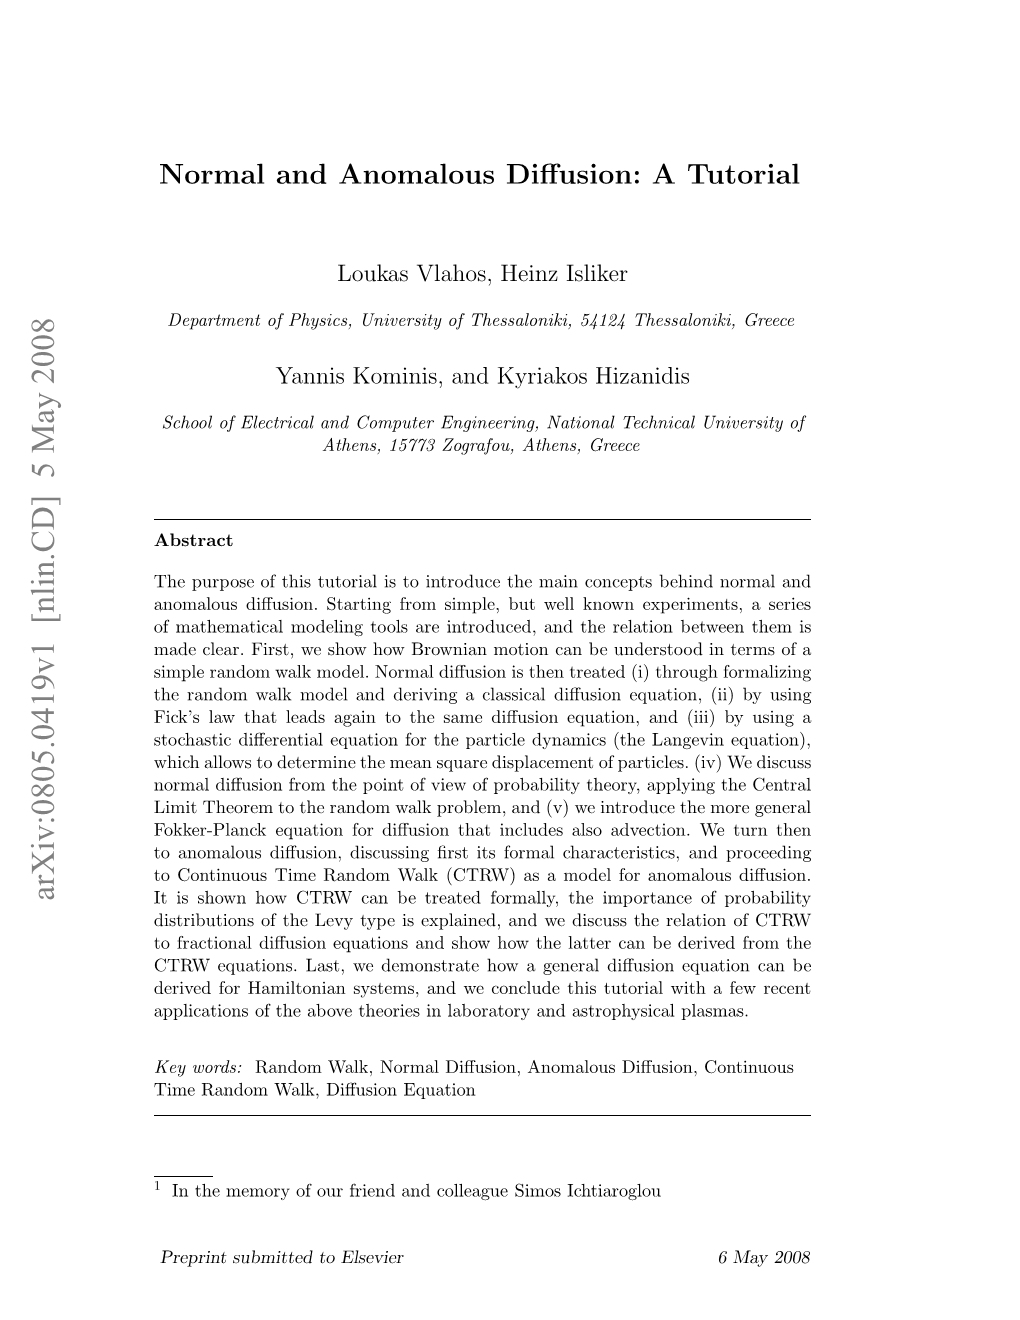 Normal and Anomalous Diffusion: a Tutorial